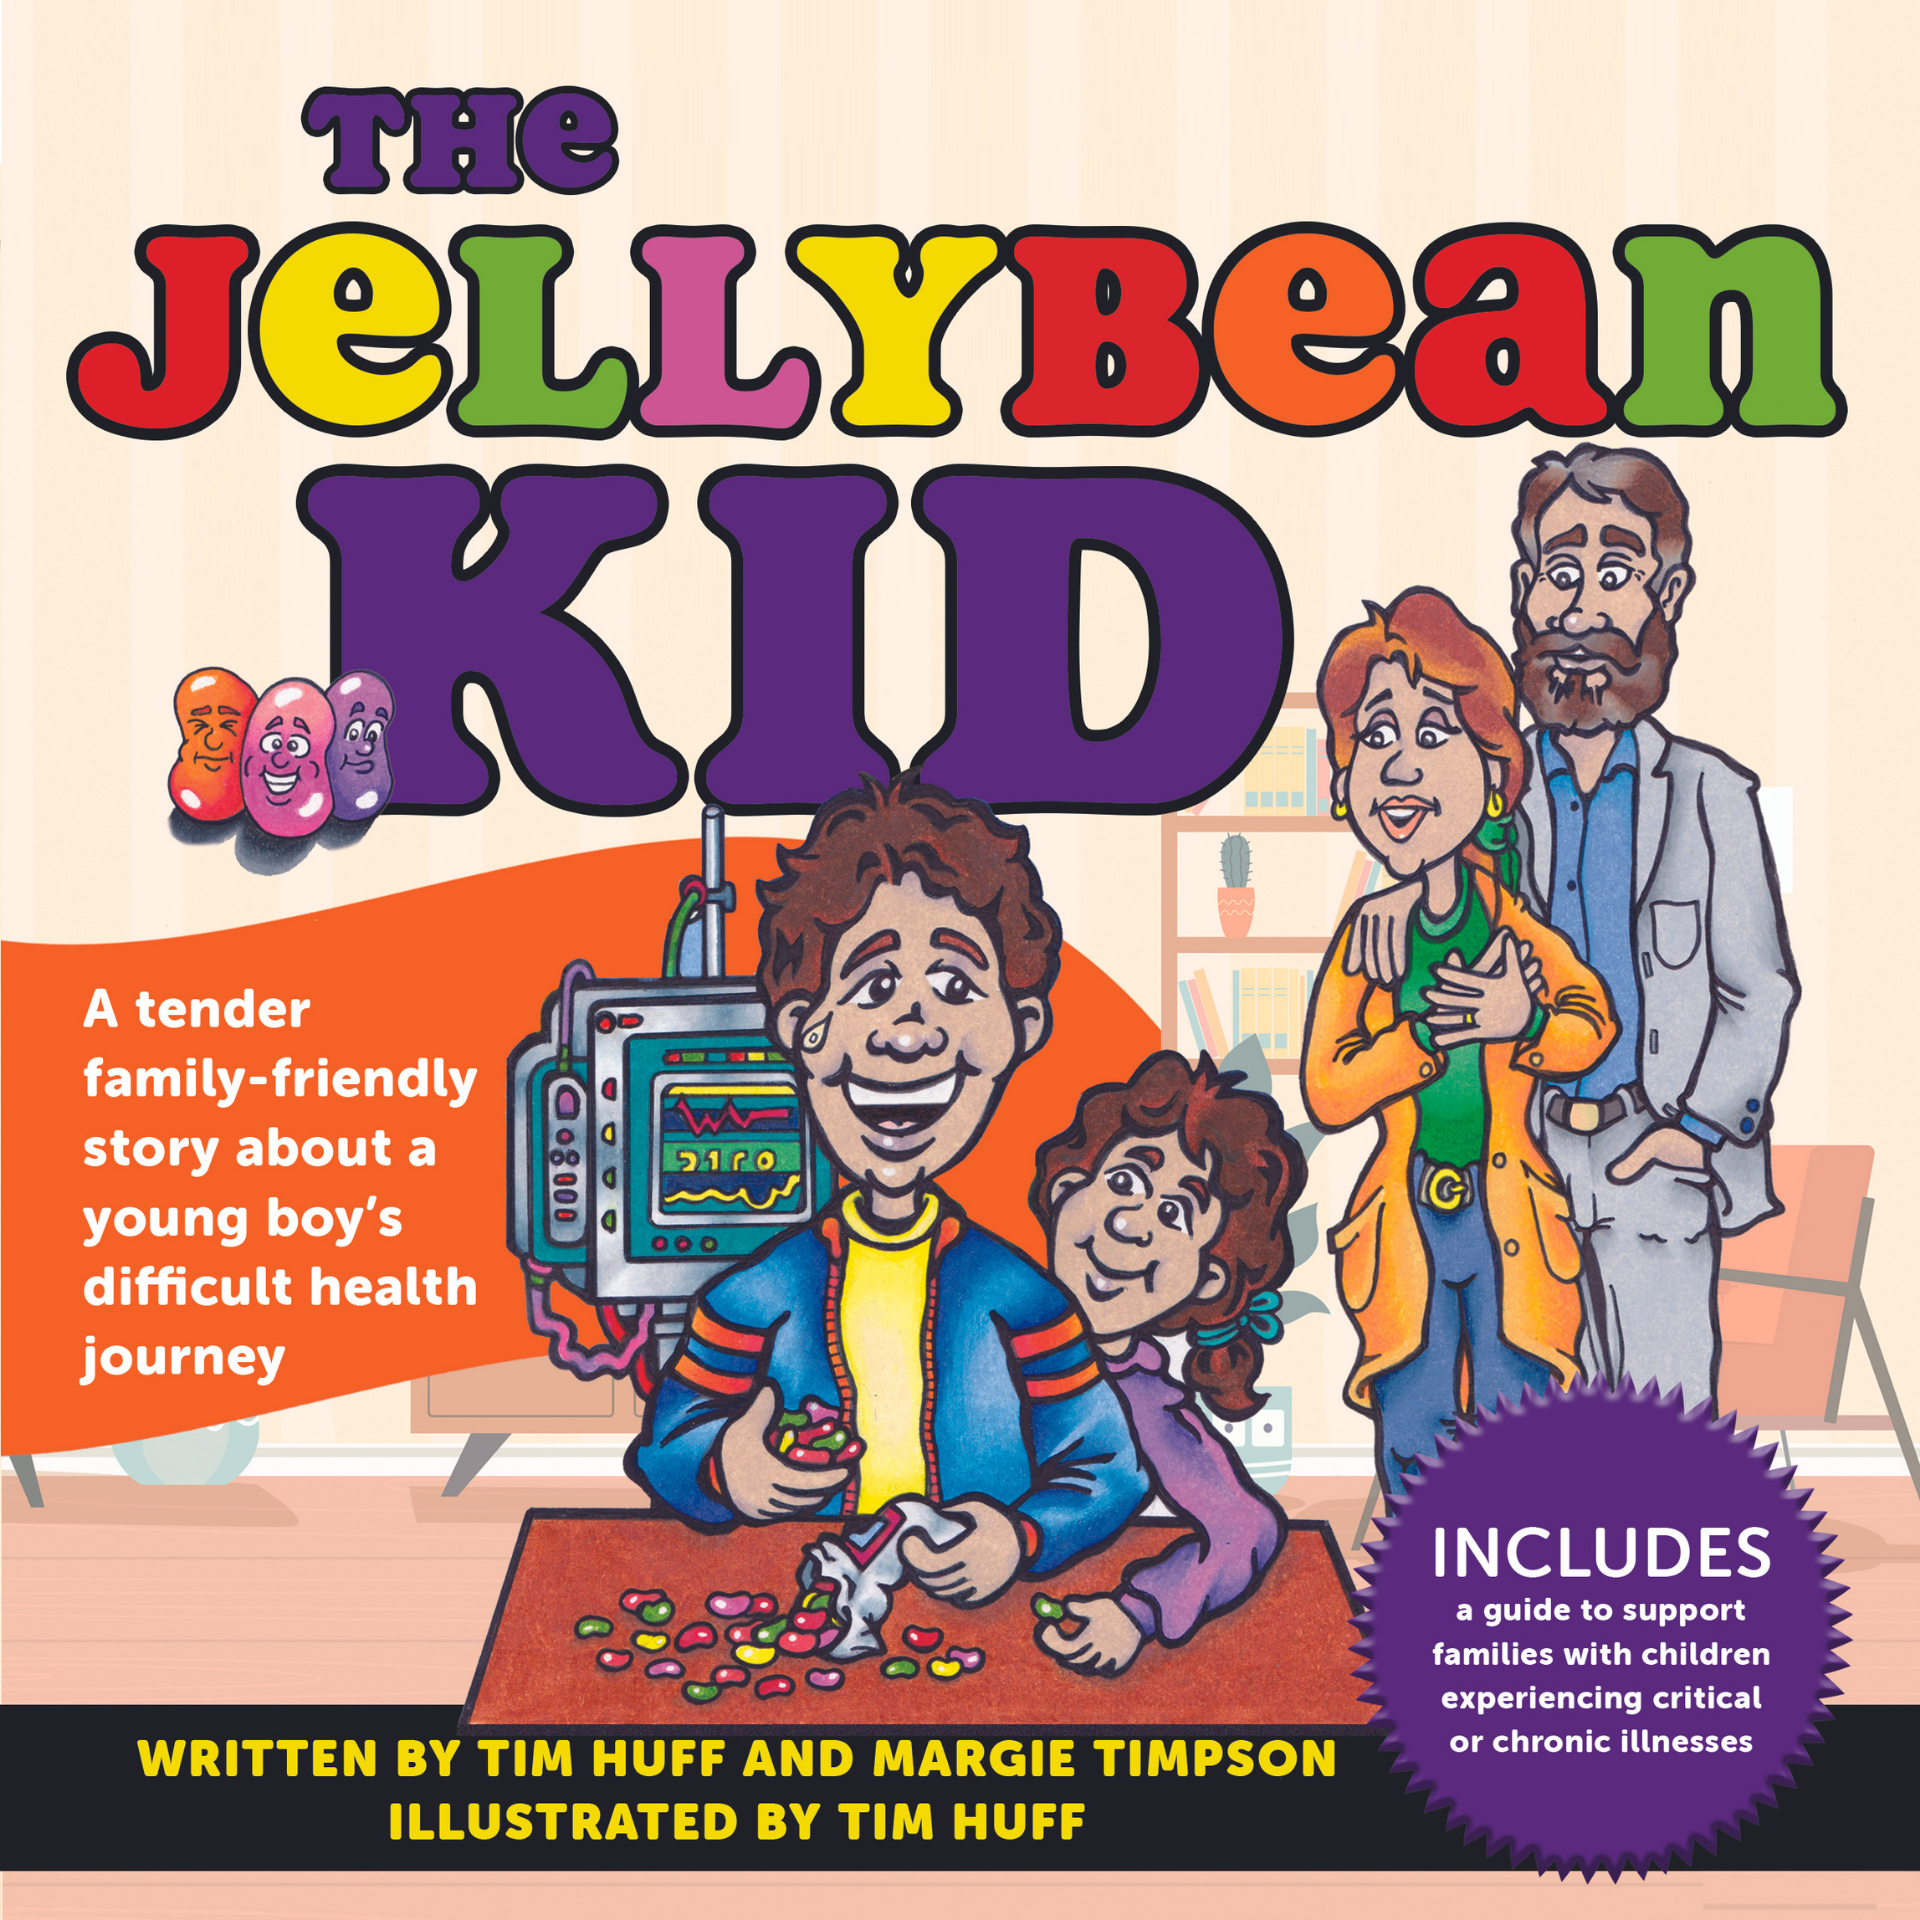 THE JELLYBEAN KID: A tender family-friendly story about a young boy's difficult health journey